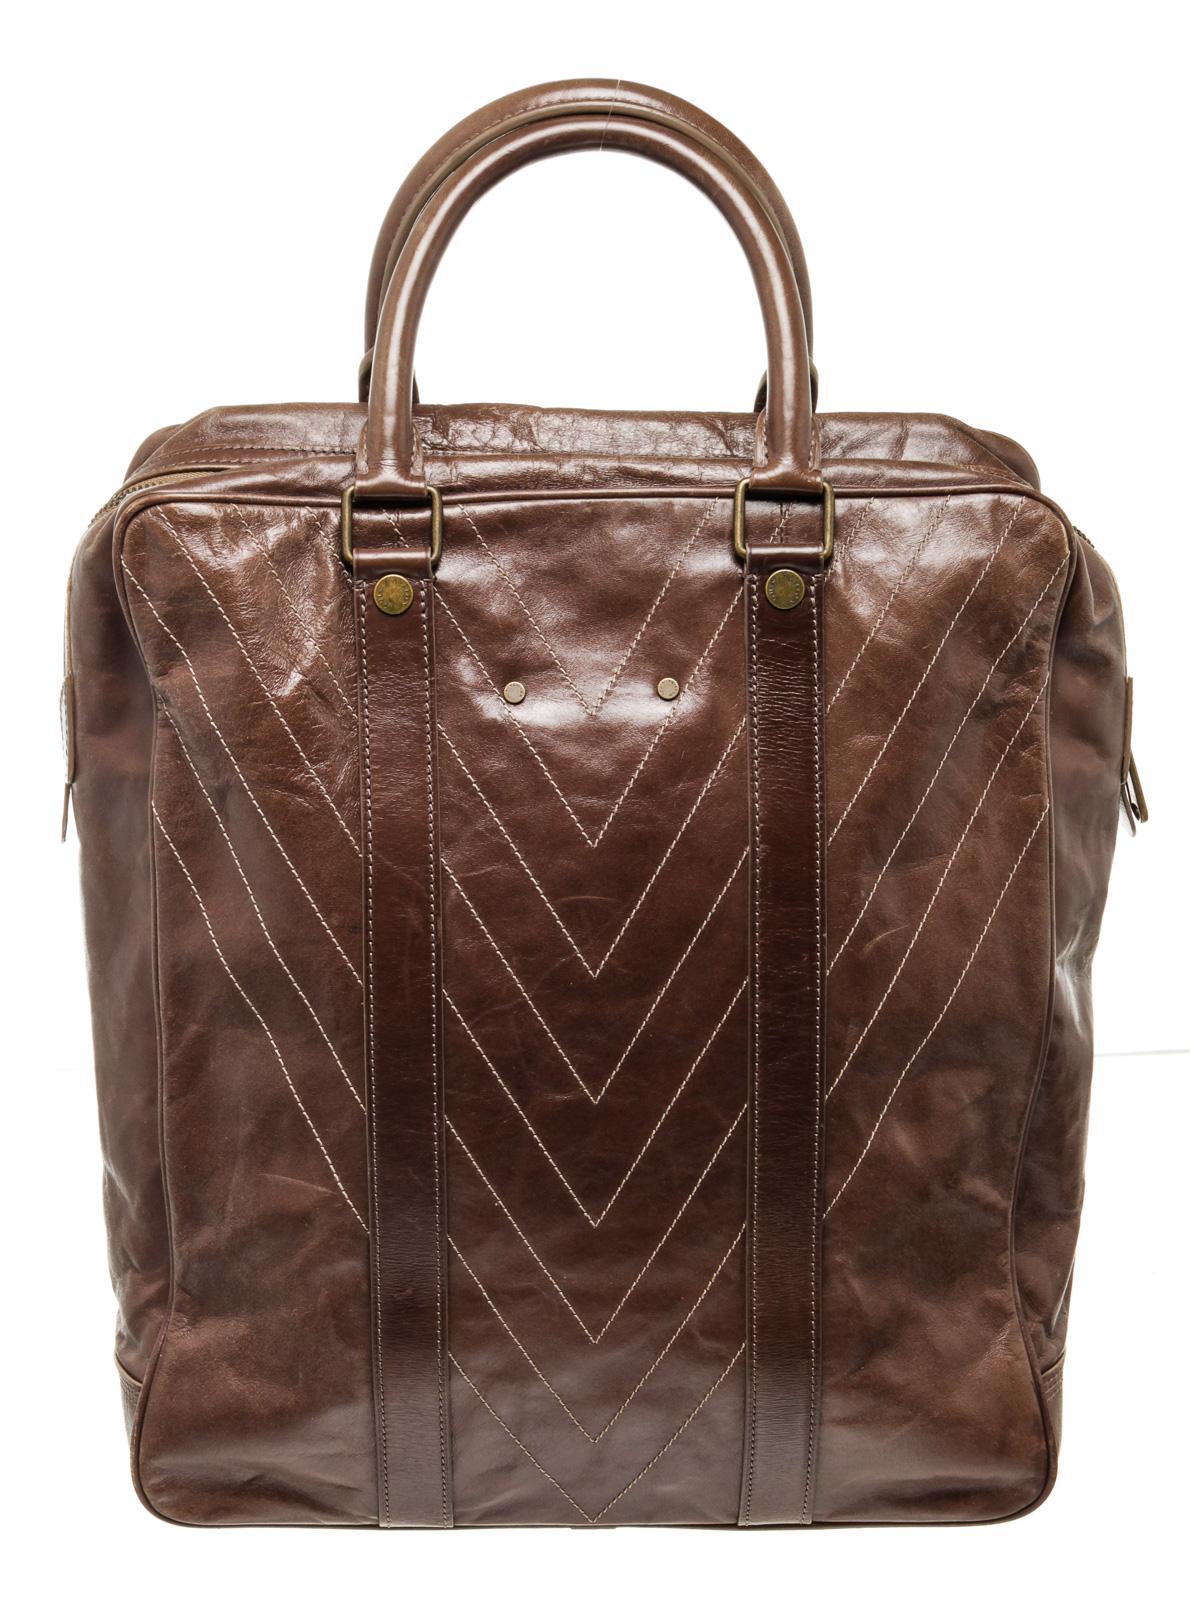 Louis Vuitton Brown Leather Soana Cabas Tote Bag In Good Condition For Sale In Irvine, CA